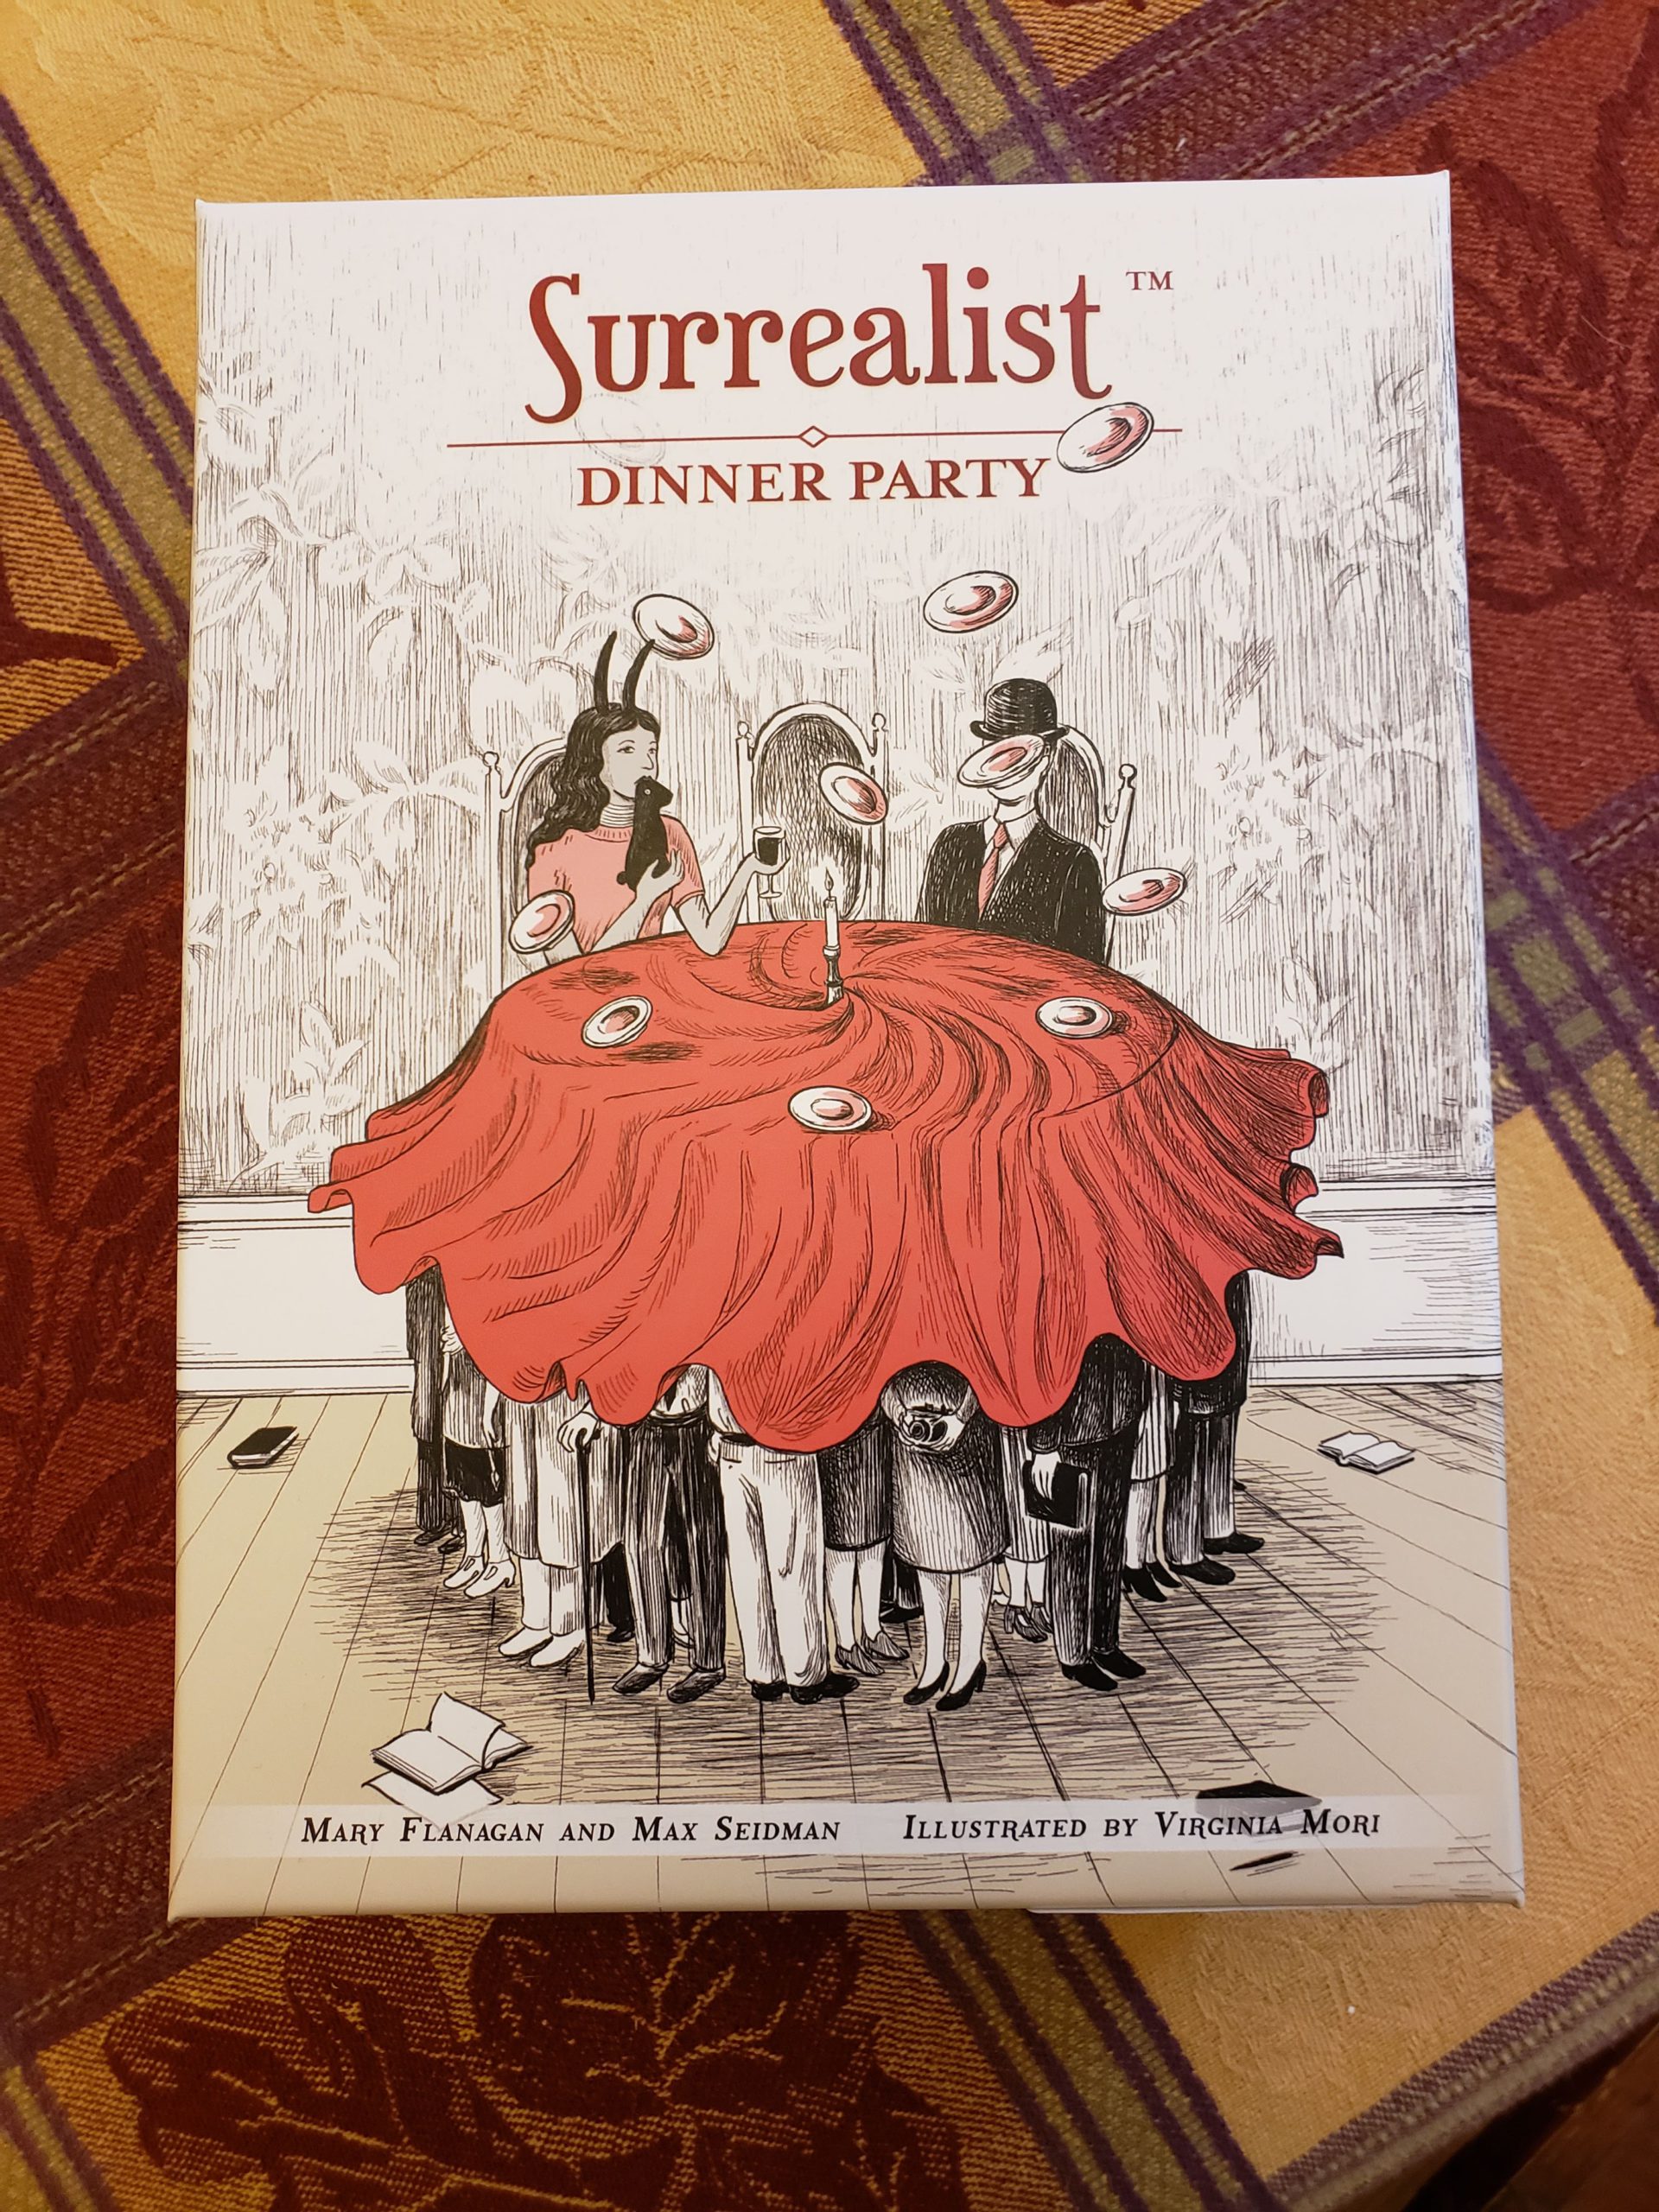 Review: Surrealist Dinner Party